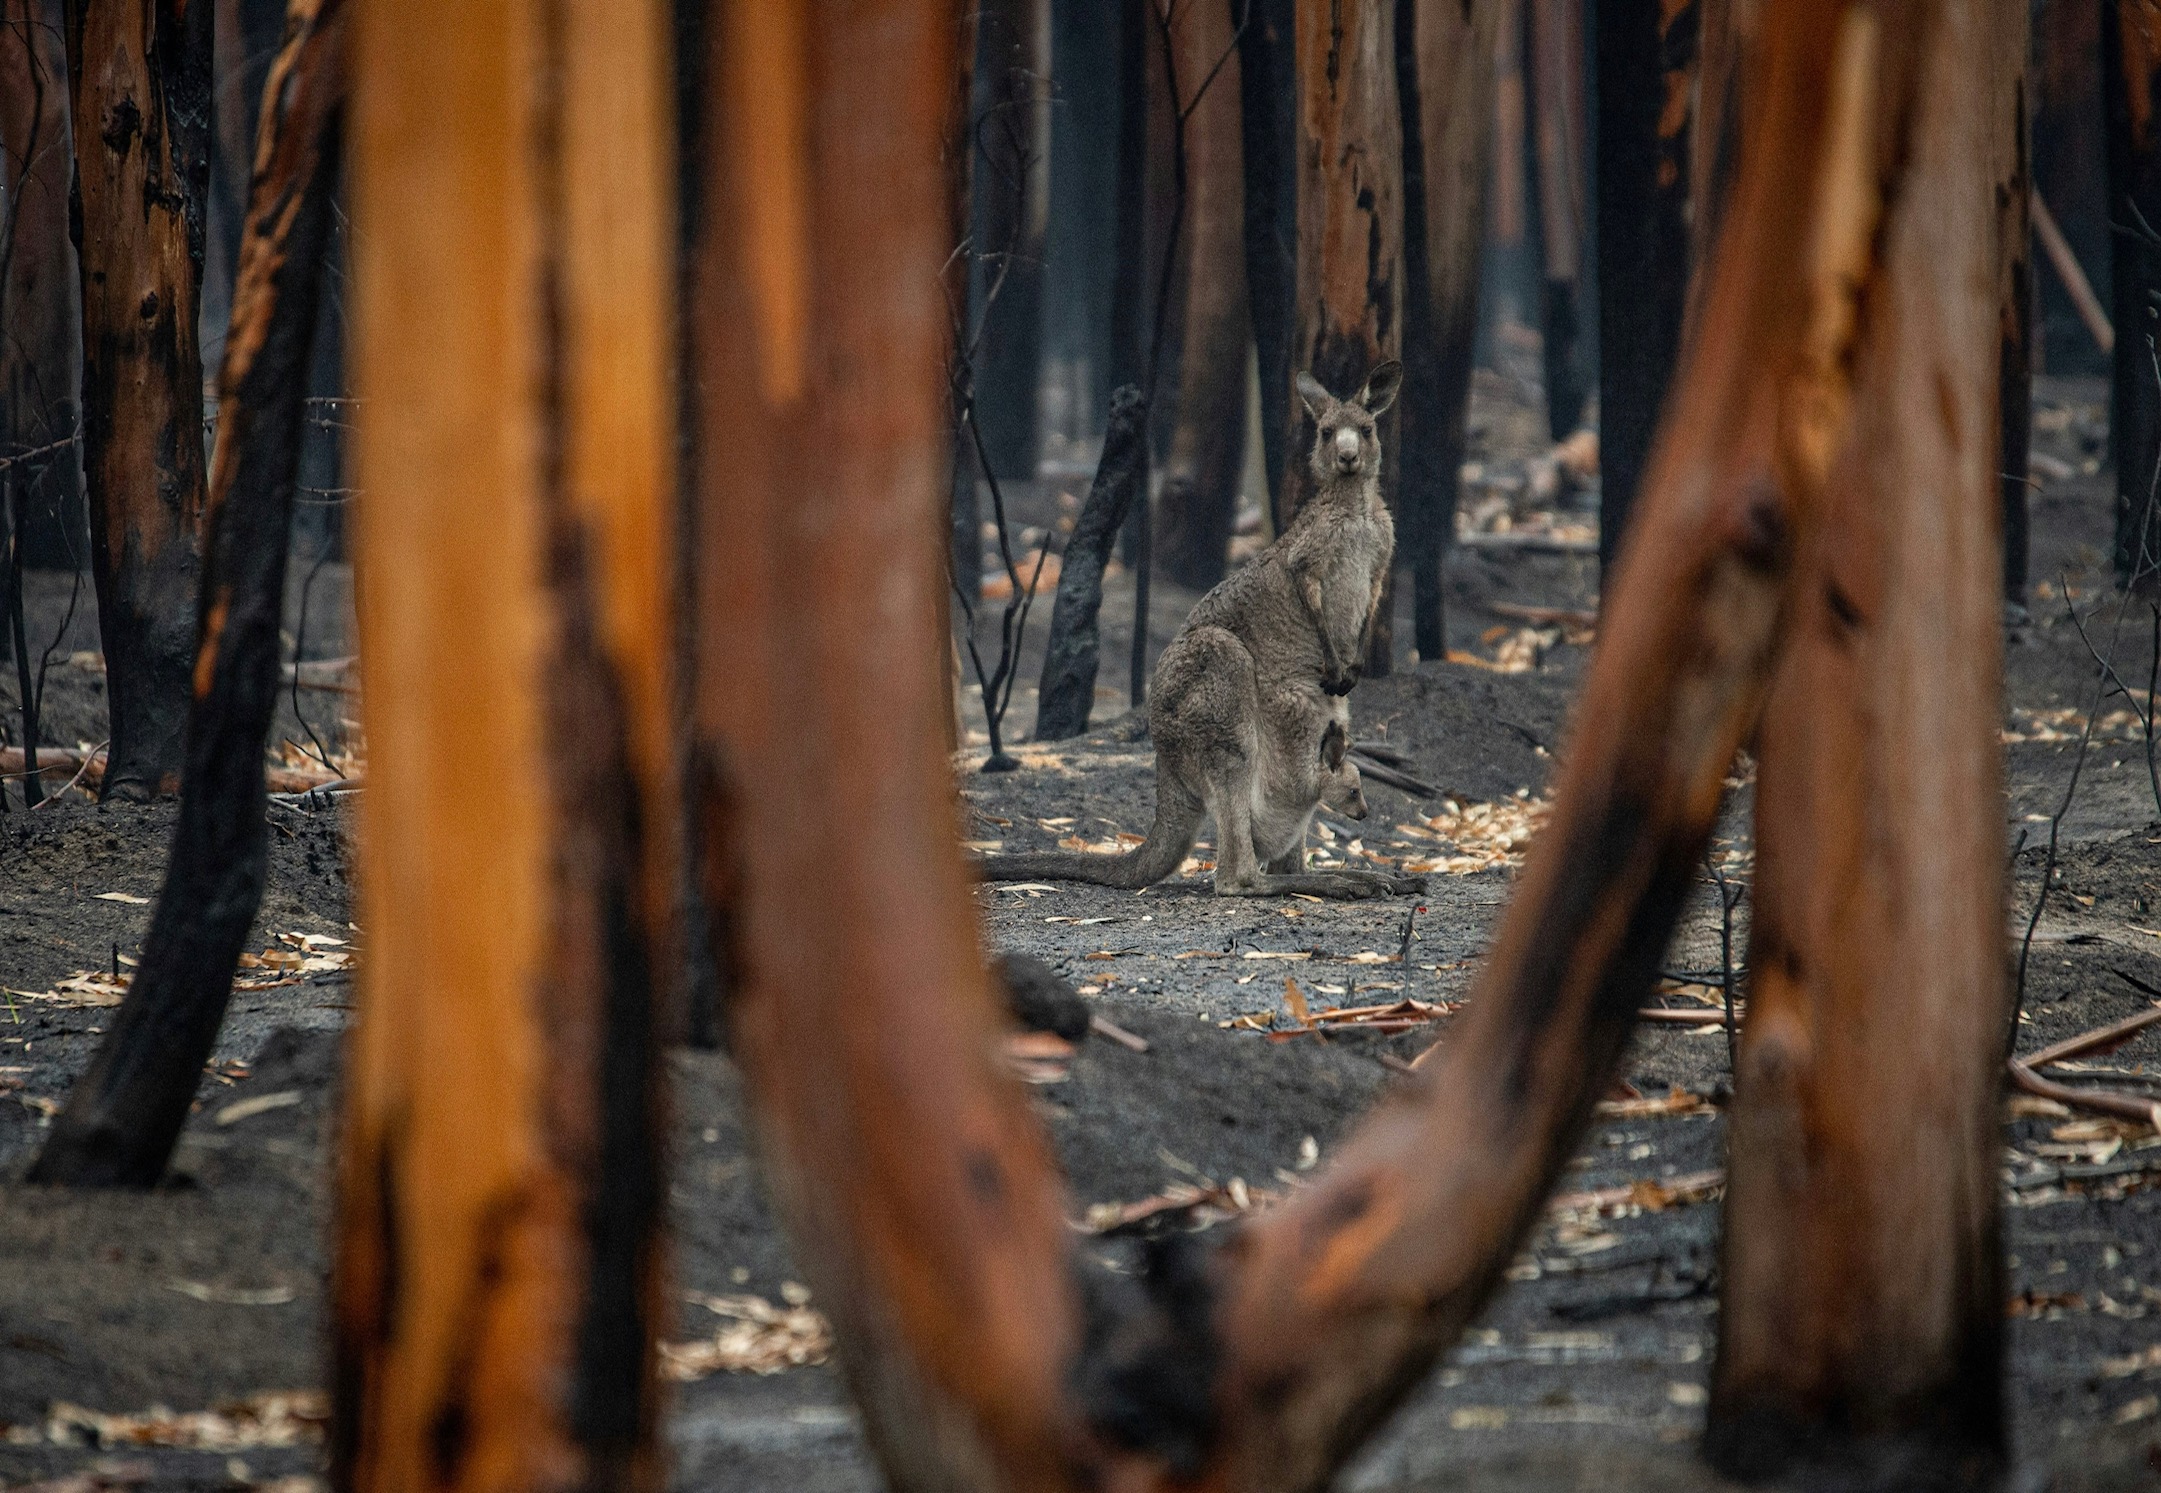 A kangaroo and Joey who survived a fire at Mallacoota, 2020. Image Jo-Anne McArthur, Unsplash